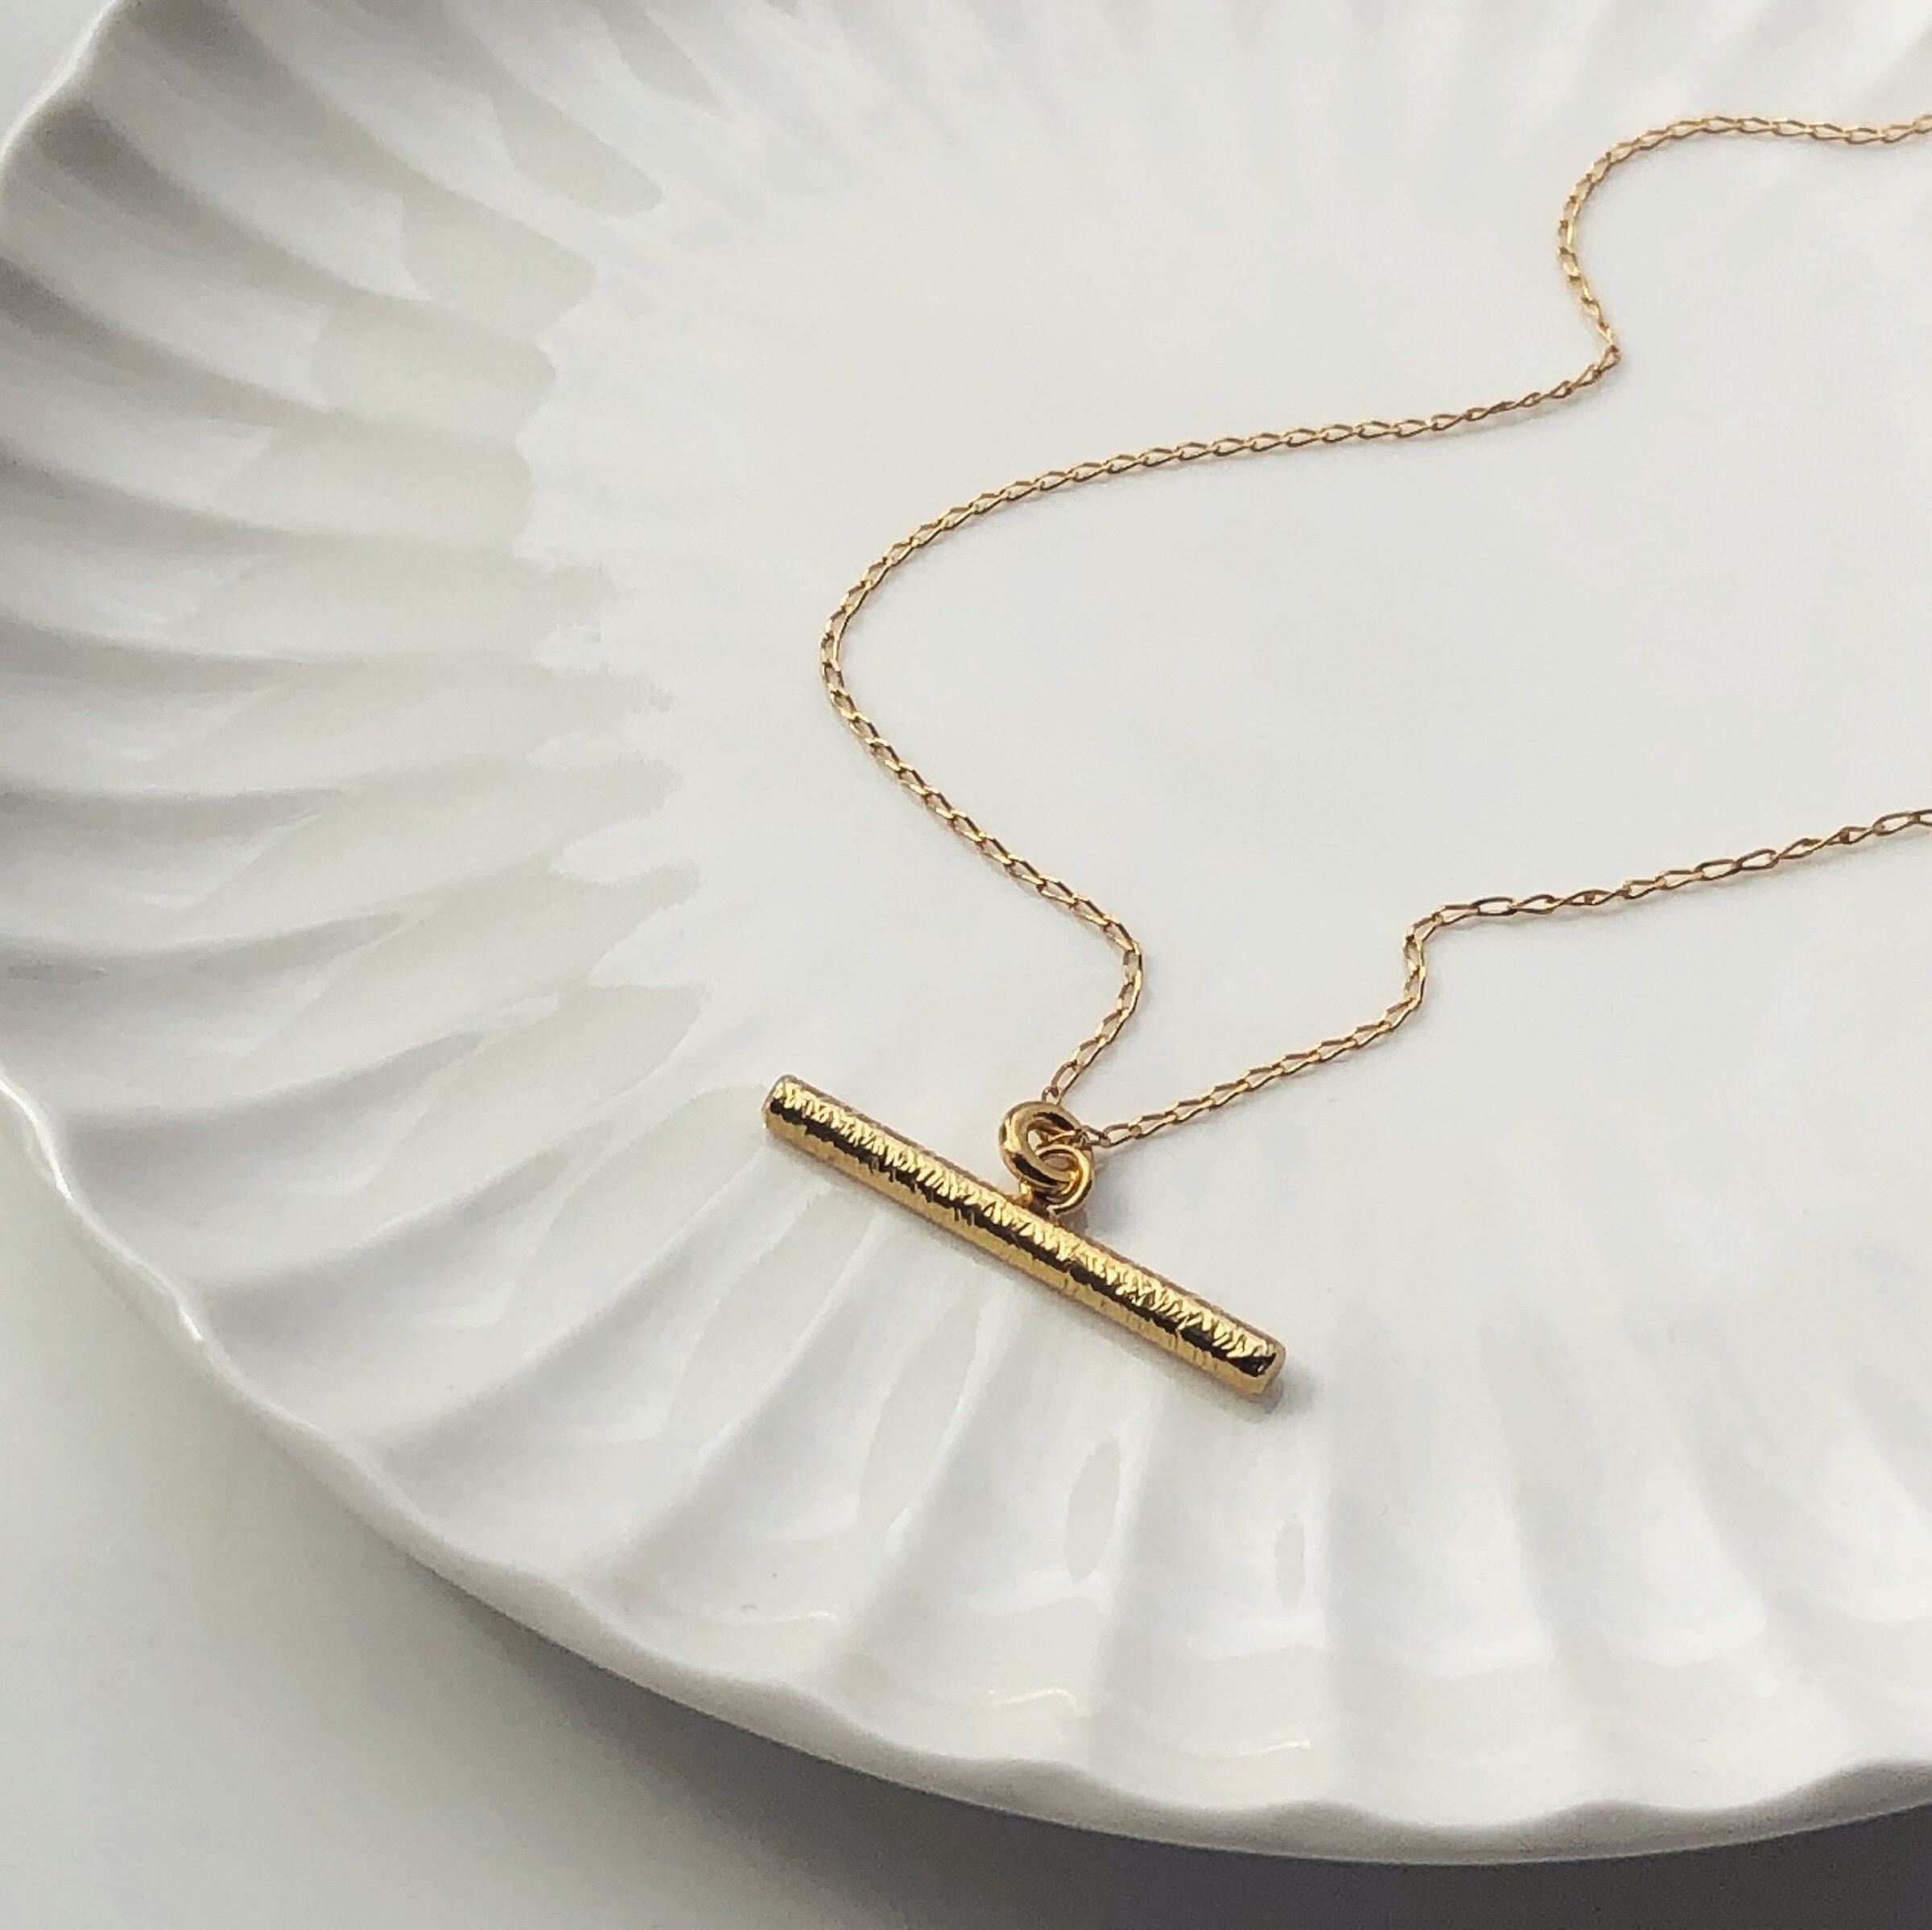 Gold T Bar Necklace With Textured Finish | Recycled Sterling Silver & 24Ct Gold-Plated Everyday Sustainable Jewellery